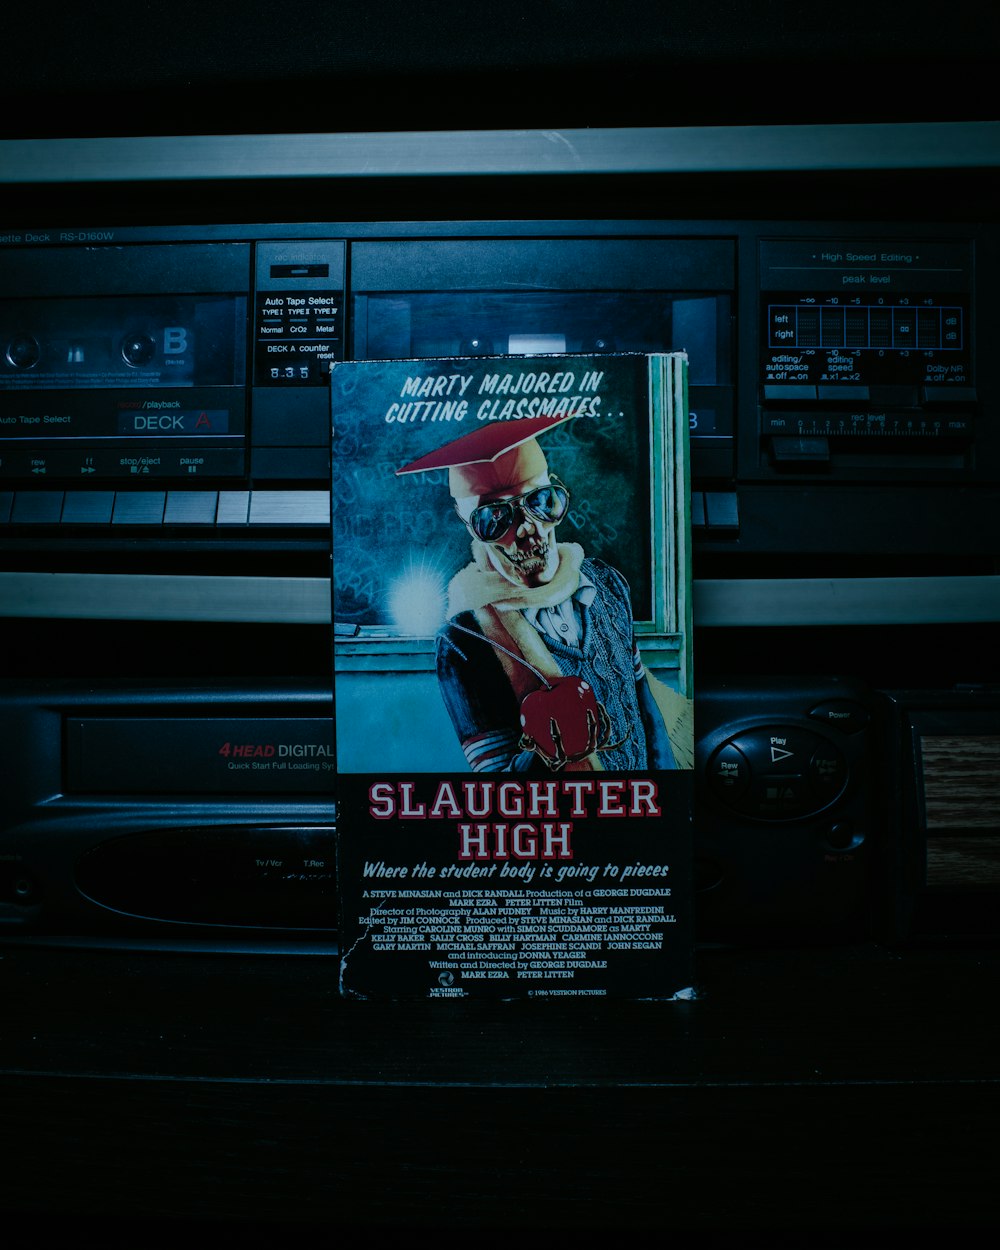 a movie poster on a cd player in a dark room